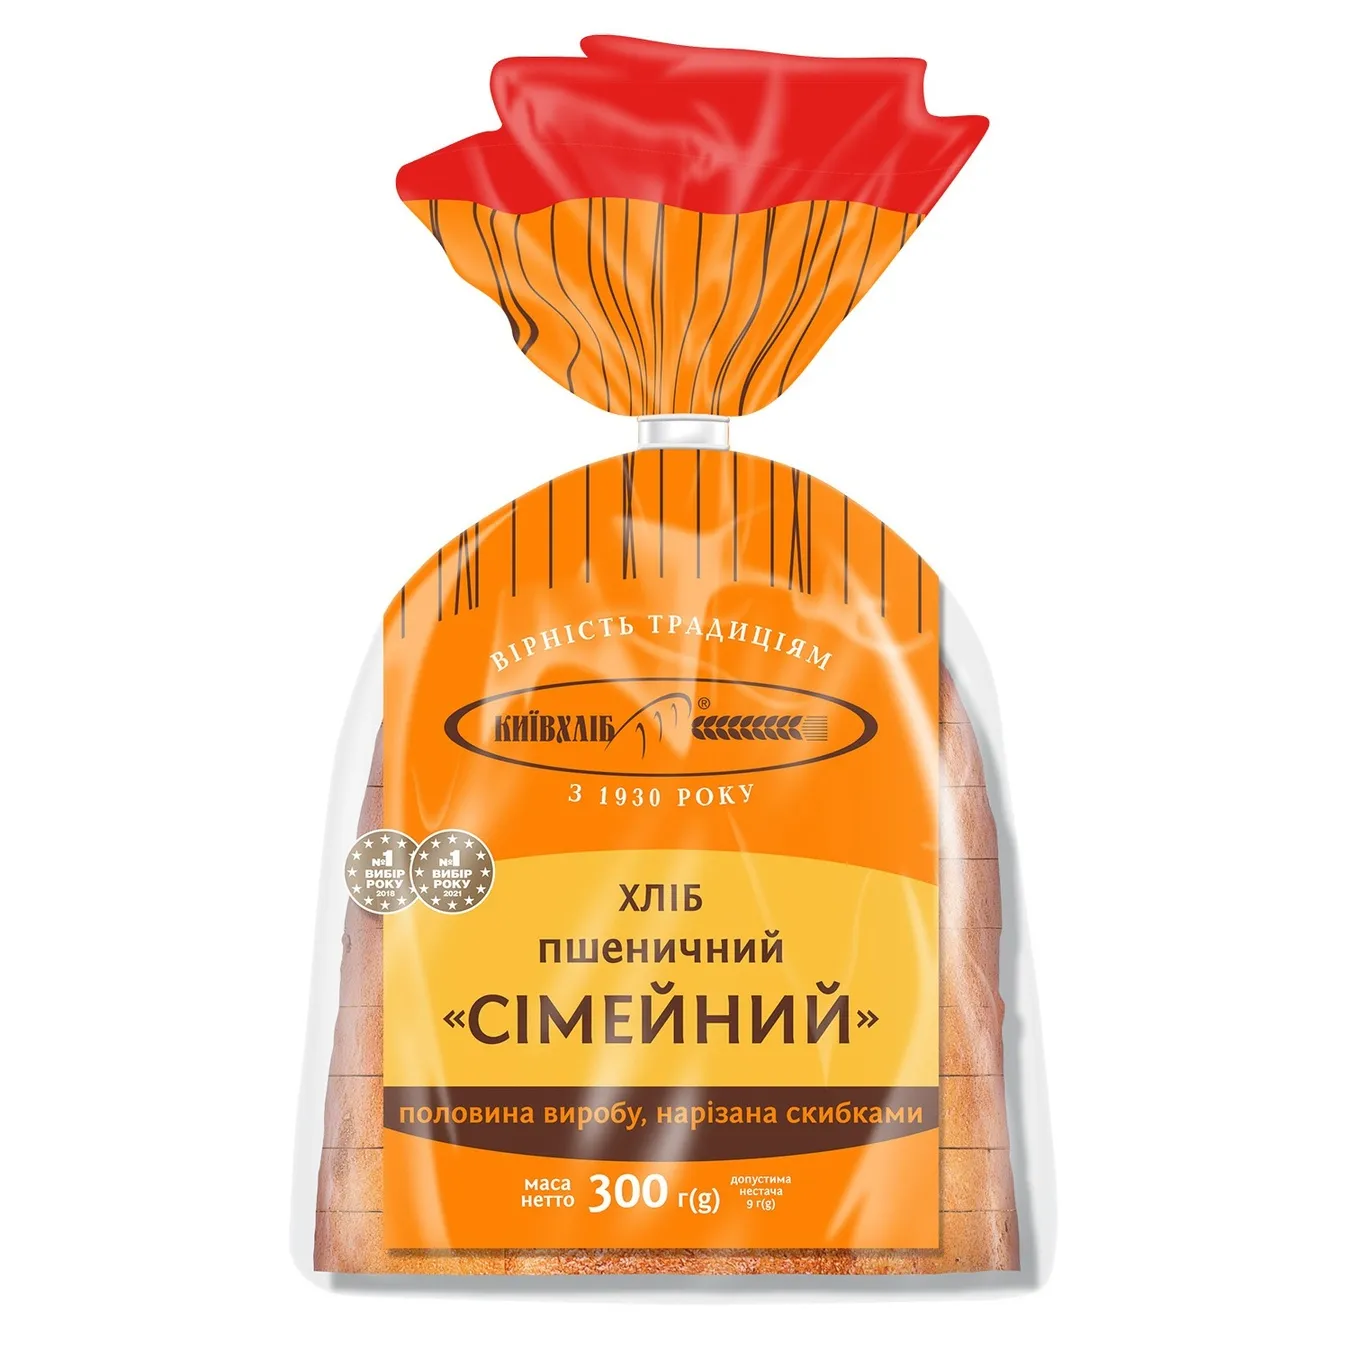 Wheat bread Kyivhlib Family half of the product cut into slices in a package of 300g